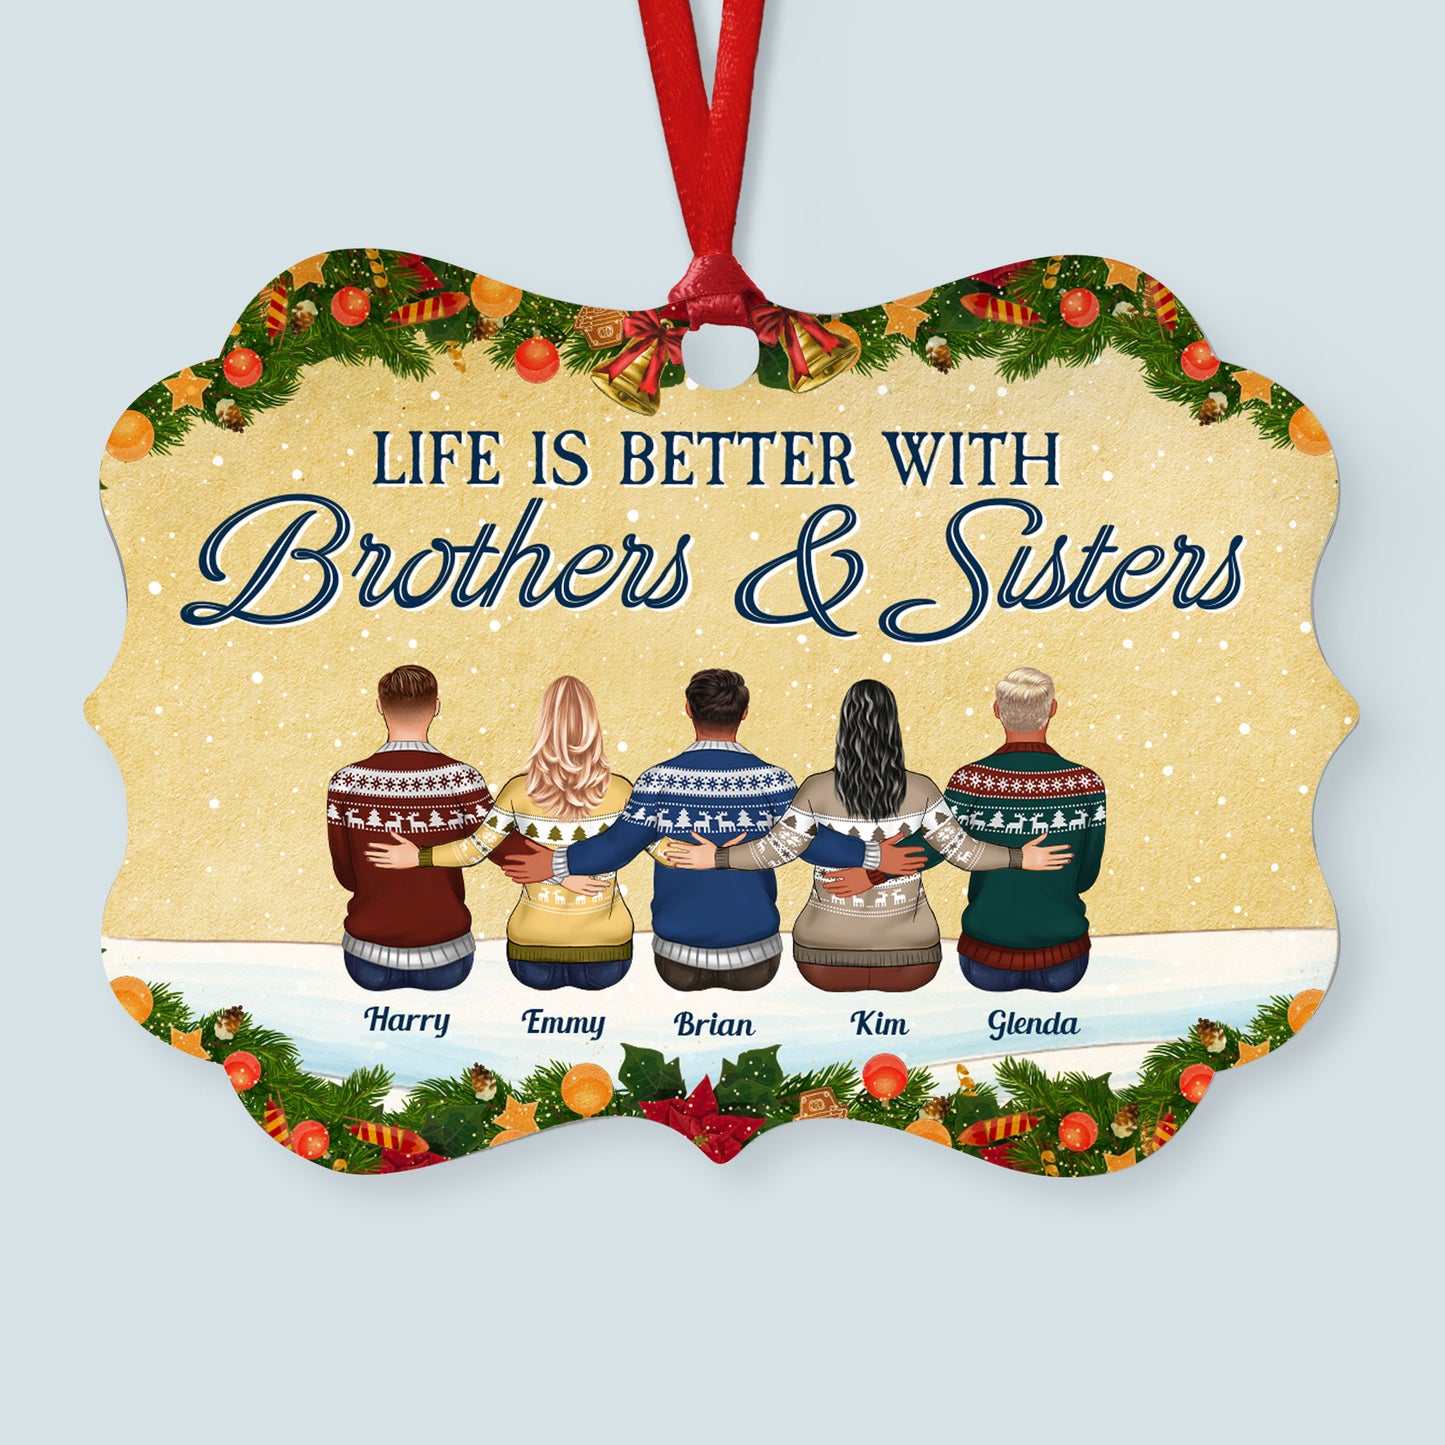 The Greatest Gifts Are Not Wrapped In Paper But In Love - Personalized Aluminum Ornament - Christmas Gift Family Ornament For Mom, Dad, Siblings